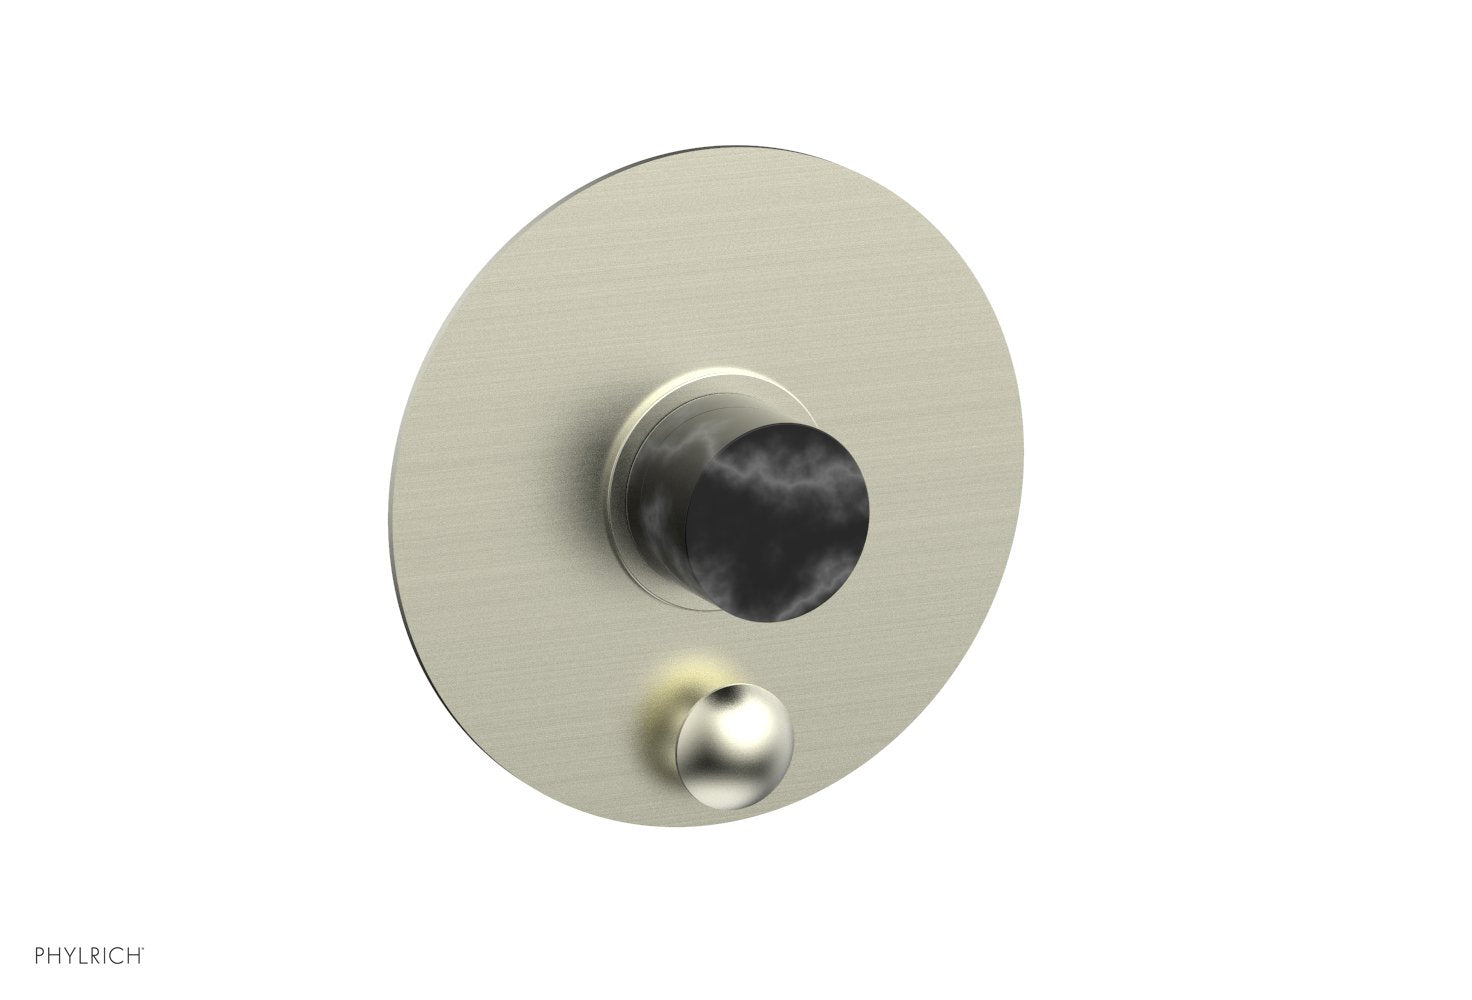 Phylrich BASIC II Pressure Balance Shower Plate with Diverter and Handle Trim Set - Black Marble